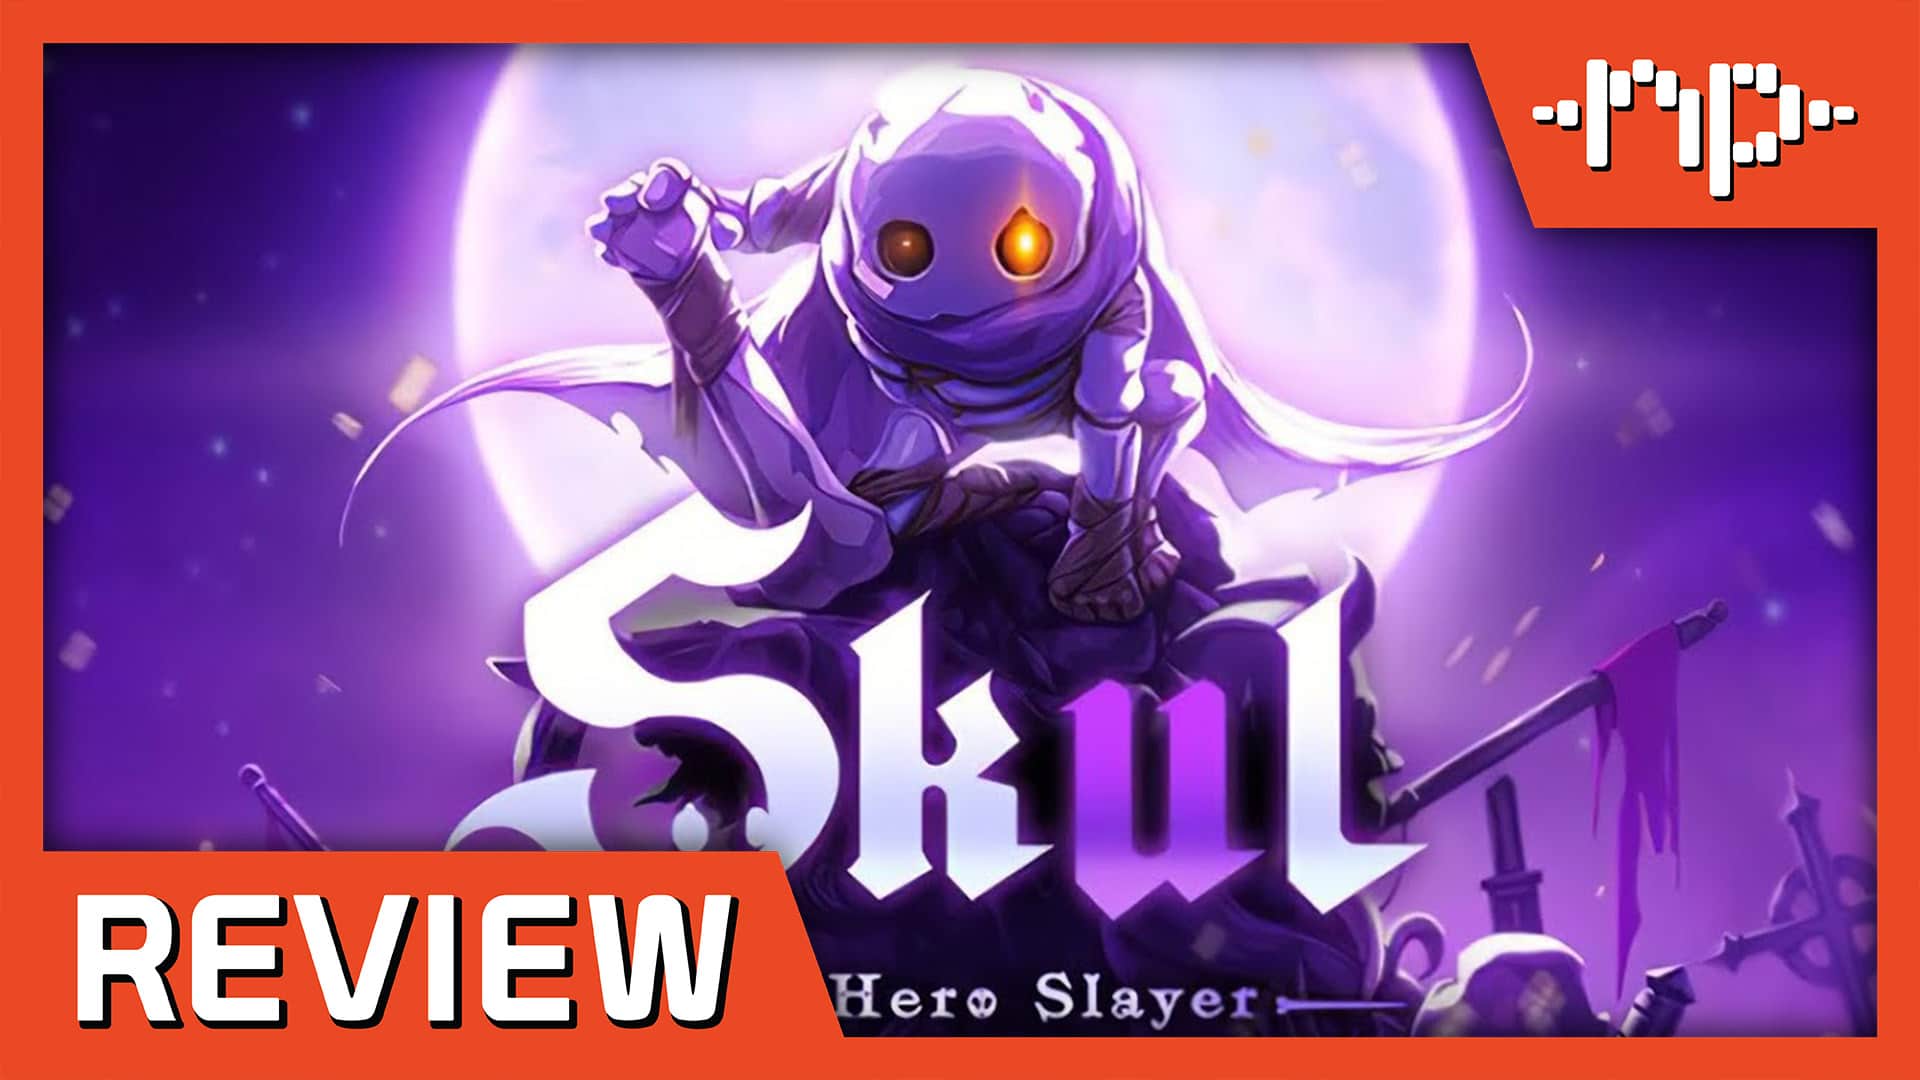 Skul: The Hero Slayer Review – Getting My Head on Straight